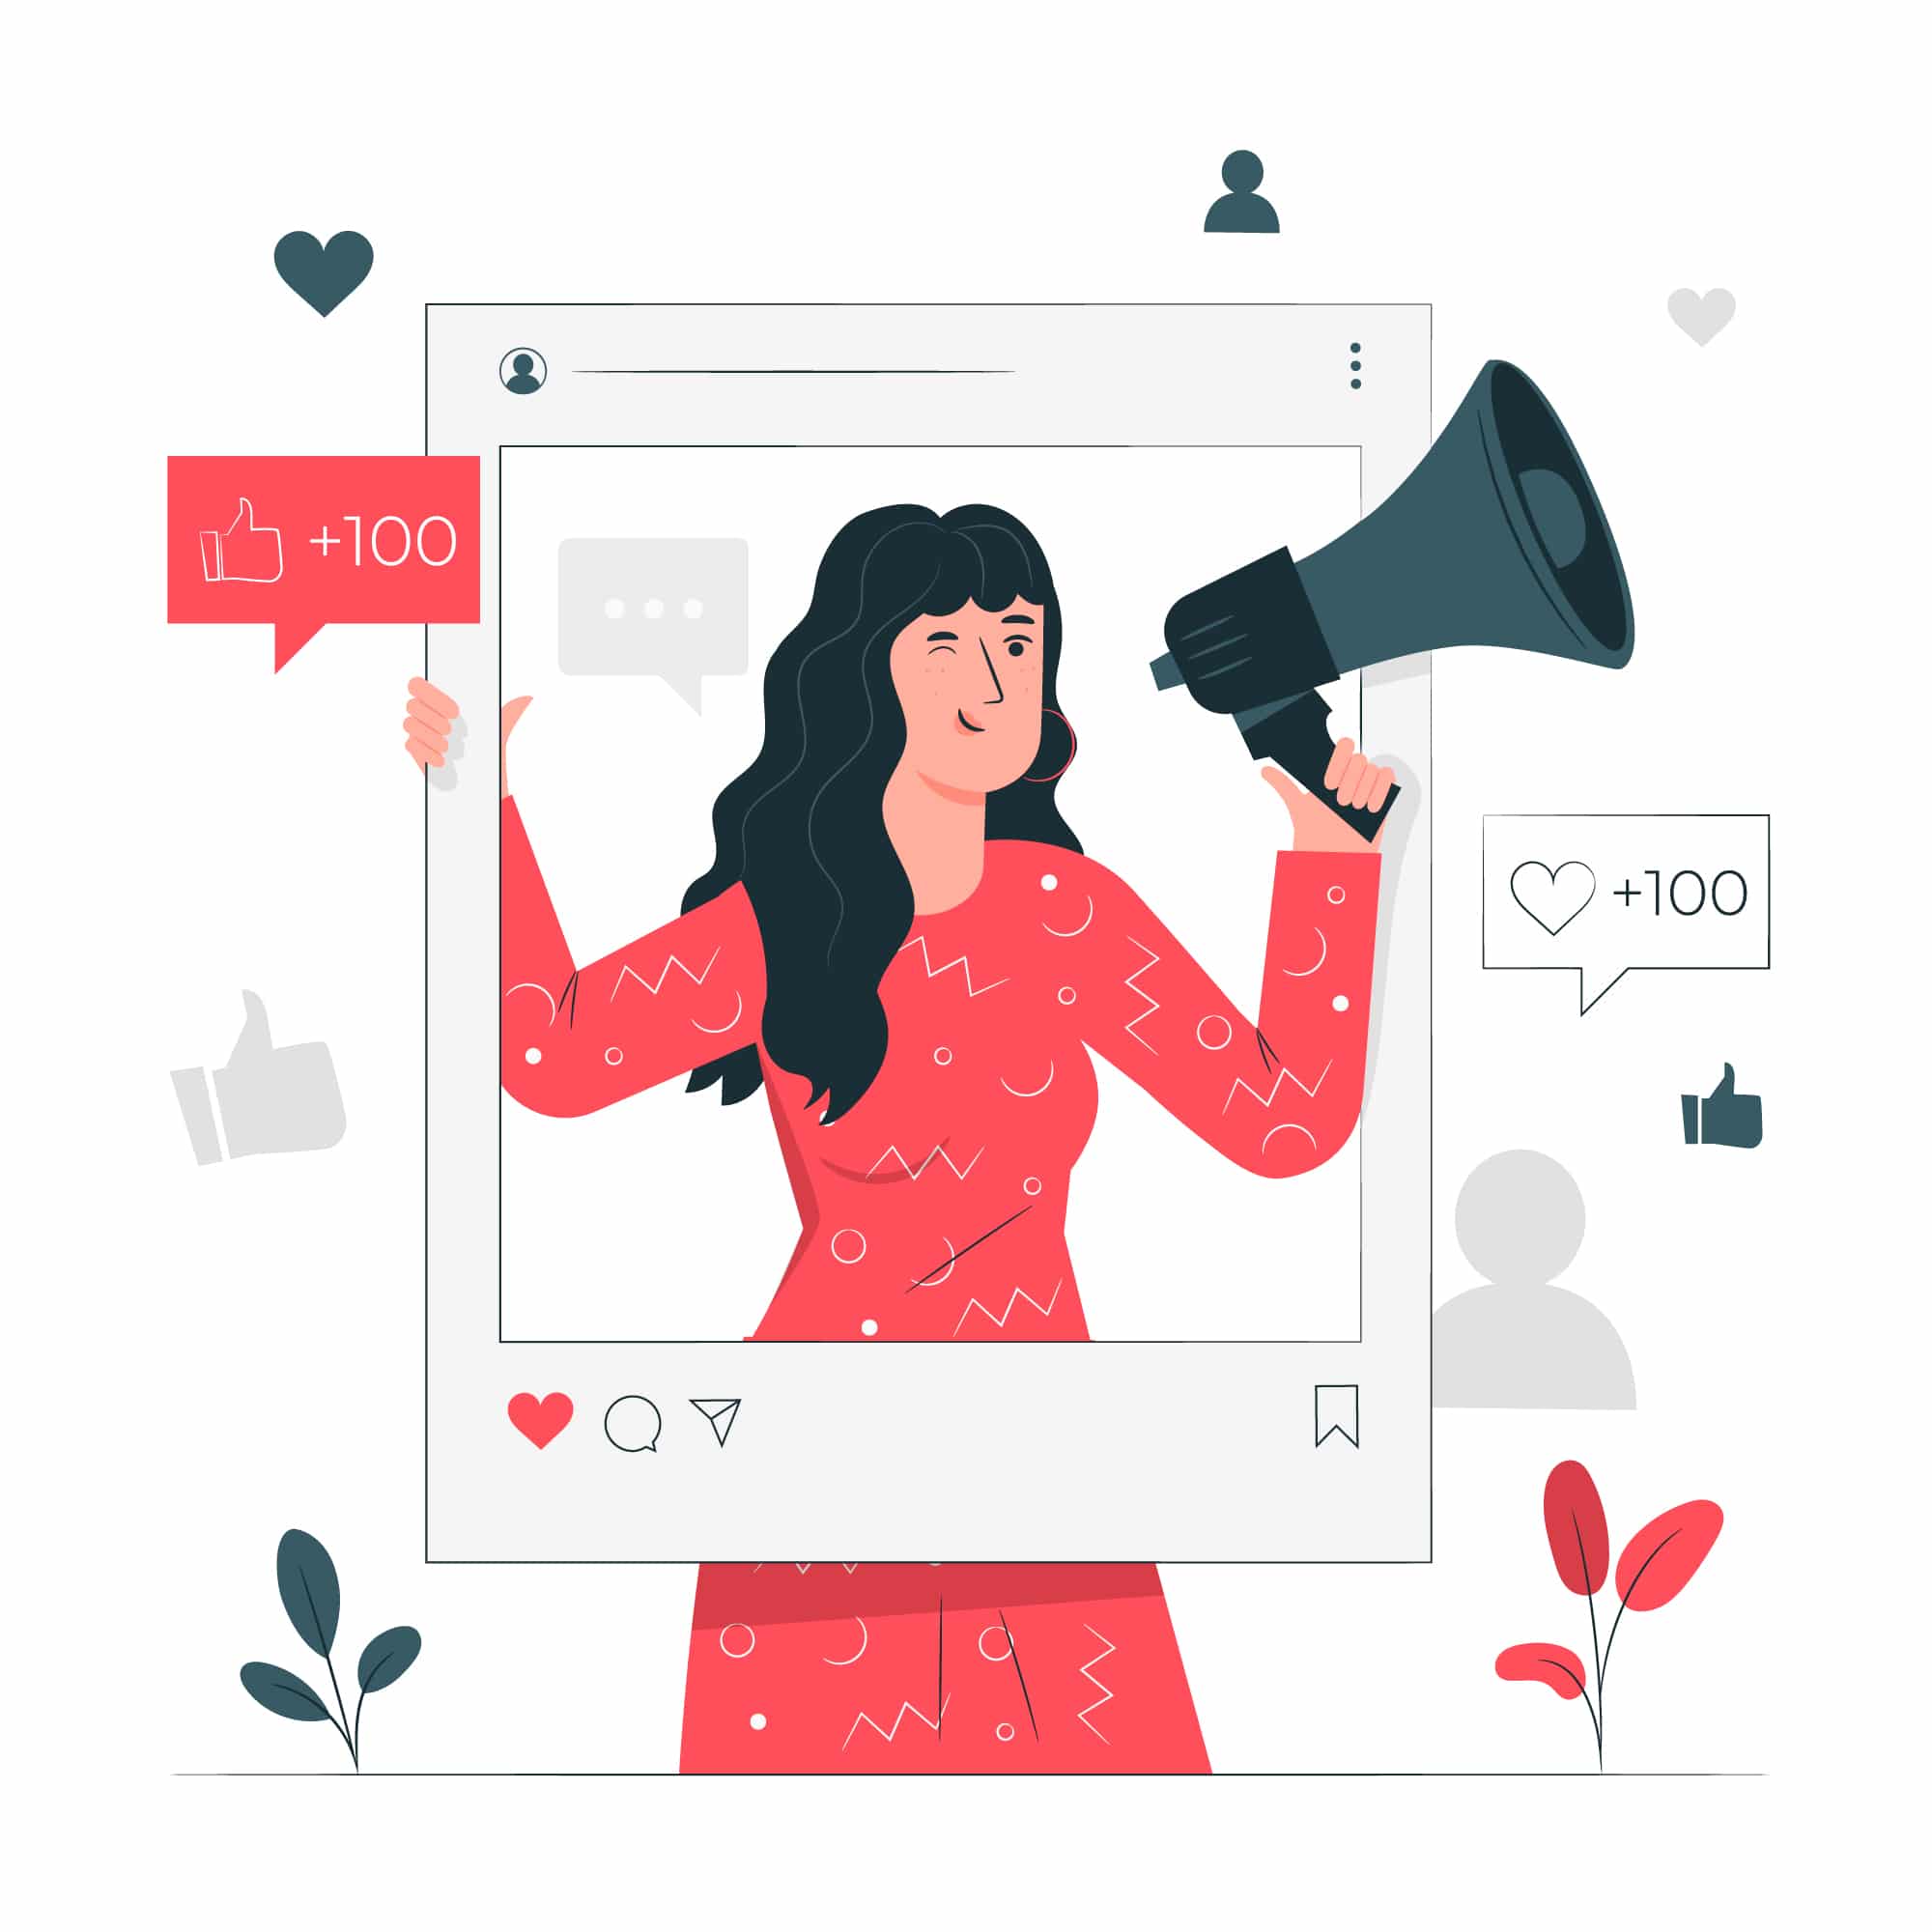 Influencer Marketing Trends You Should Keep an Eye On